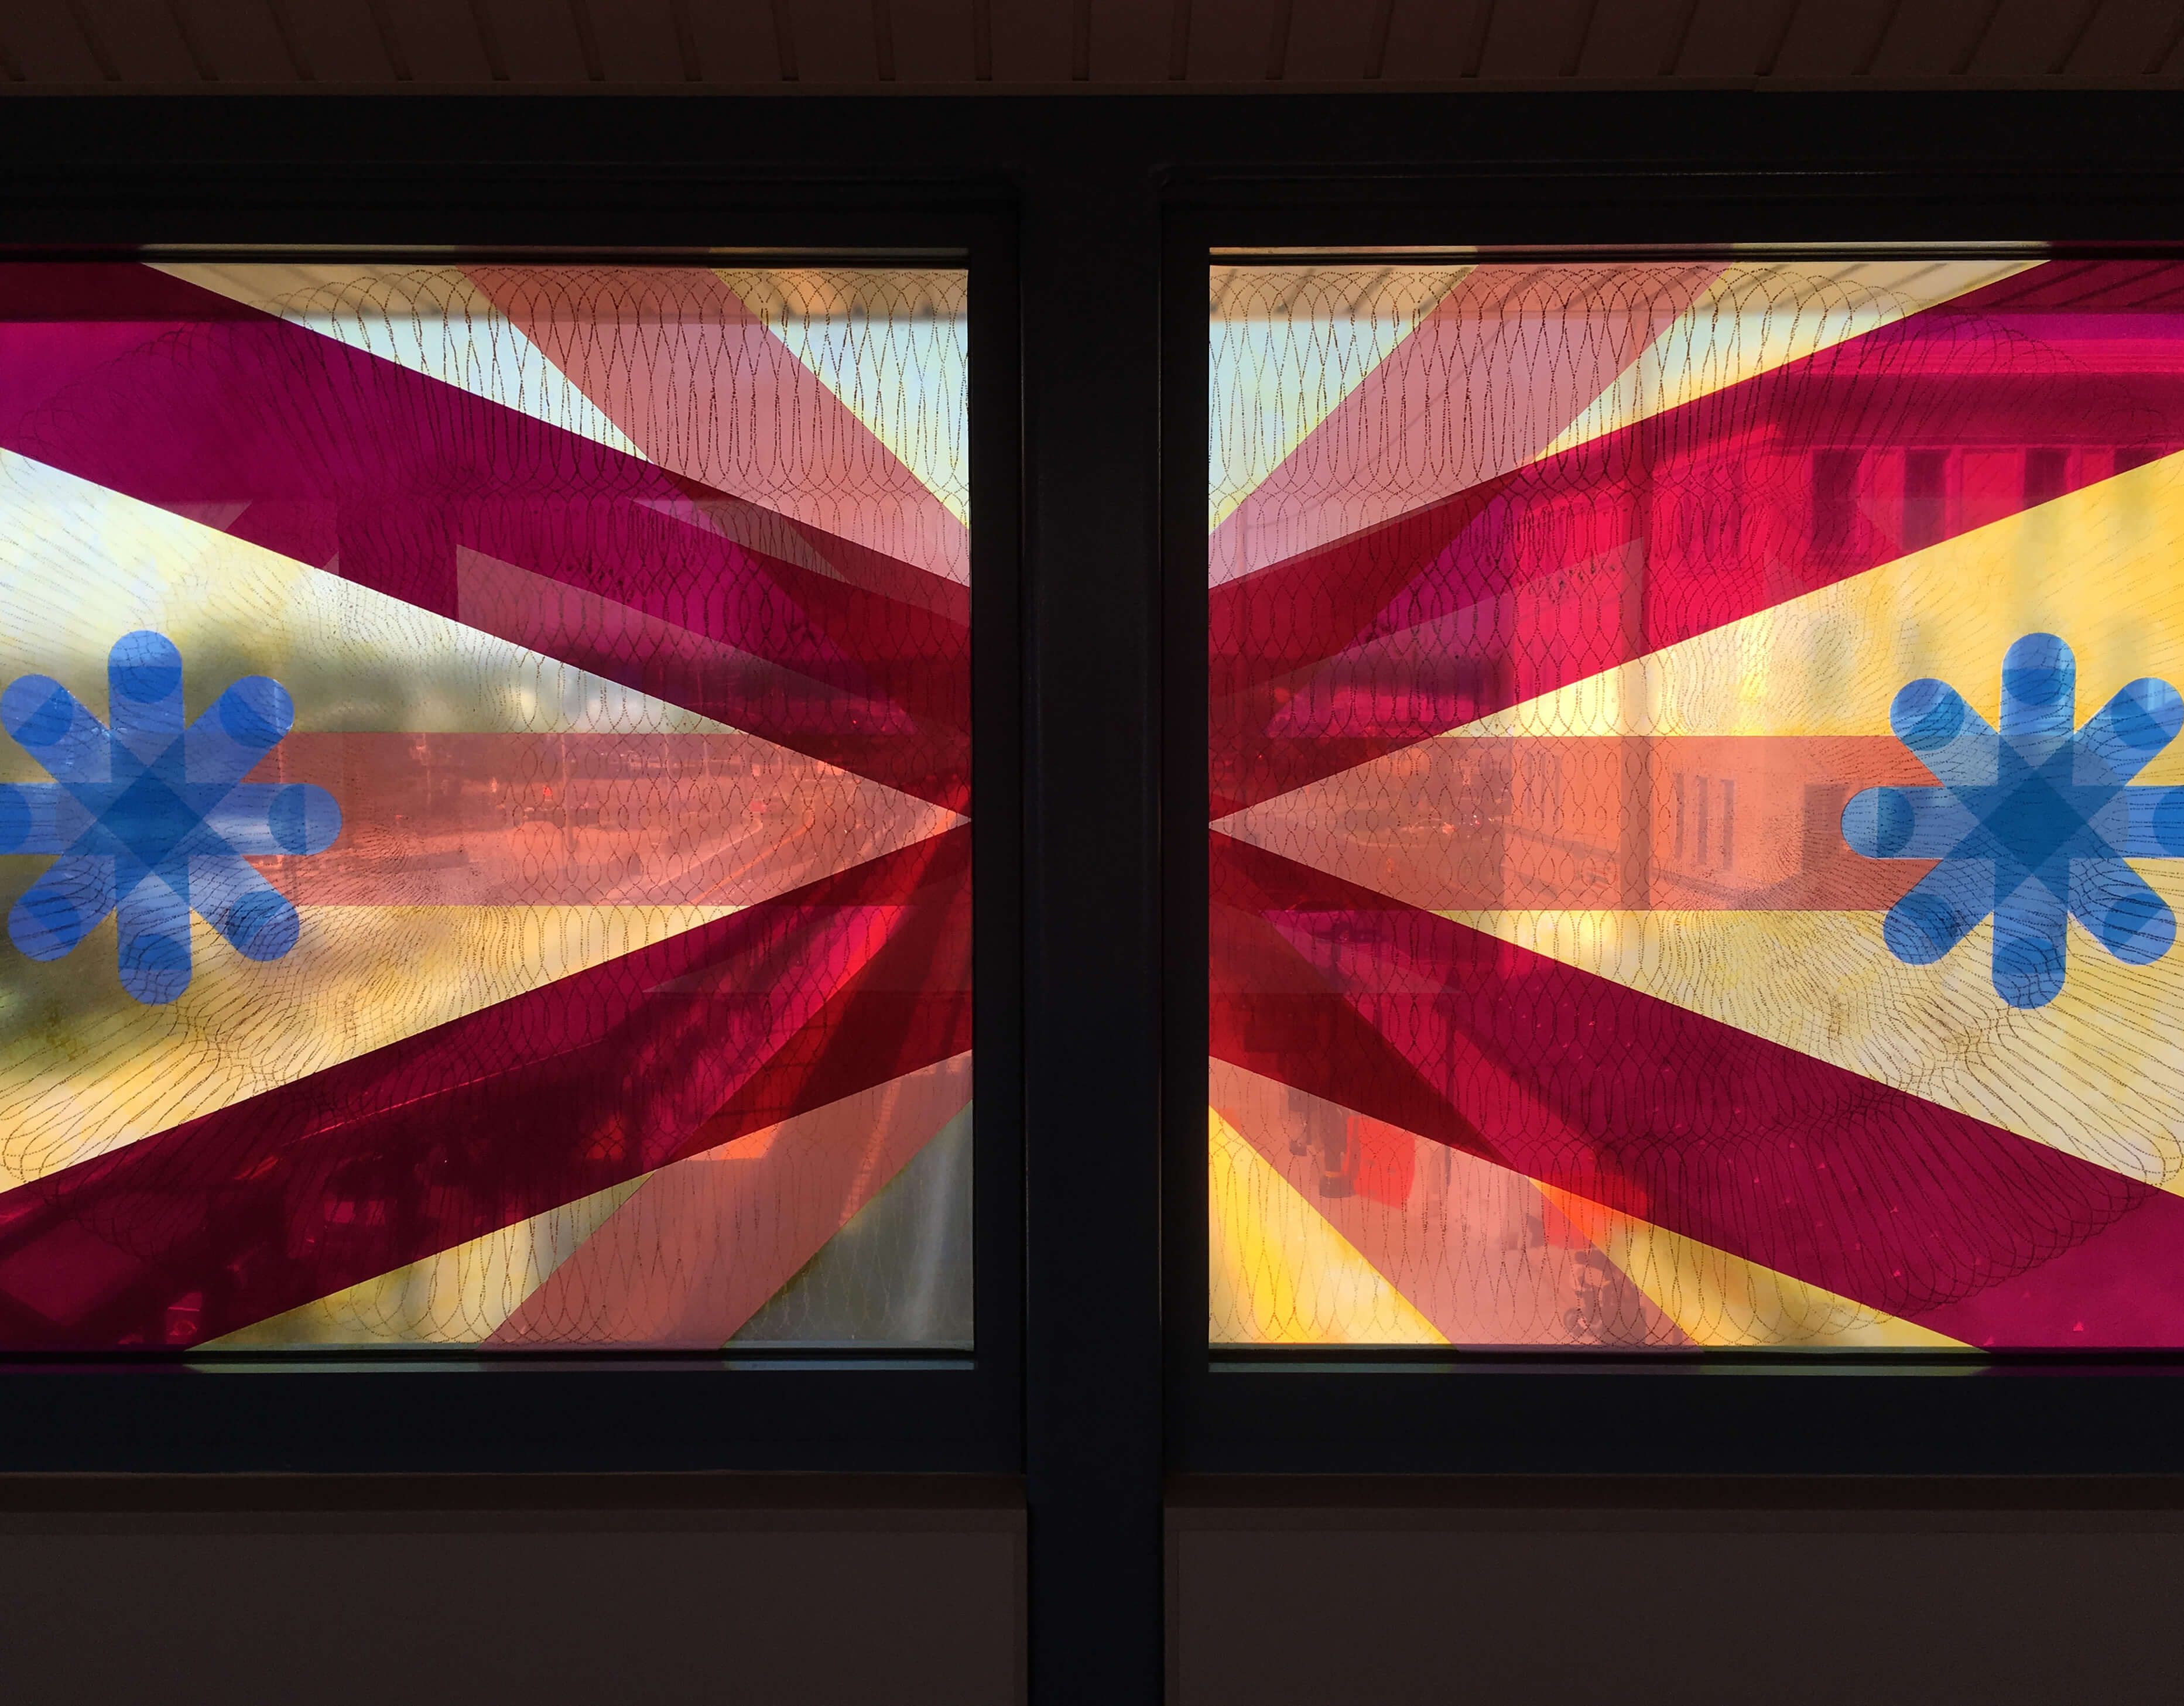 Artwork by Mary Judge    <em>American Season</em><br >Glass art in paint and lamination by Mayer of Munich<br >Wyandanch Station, MTA Arts & Design and Long Island Rail Road